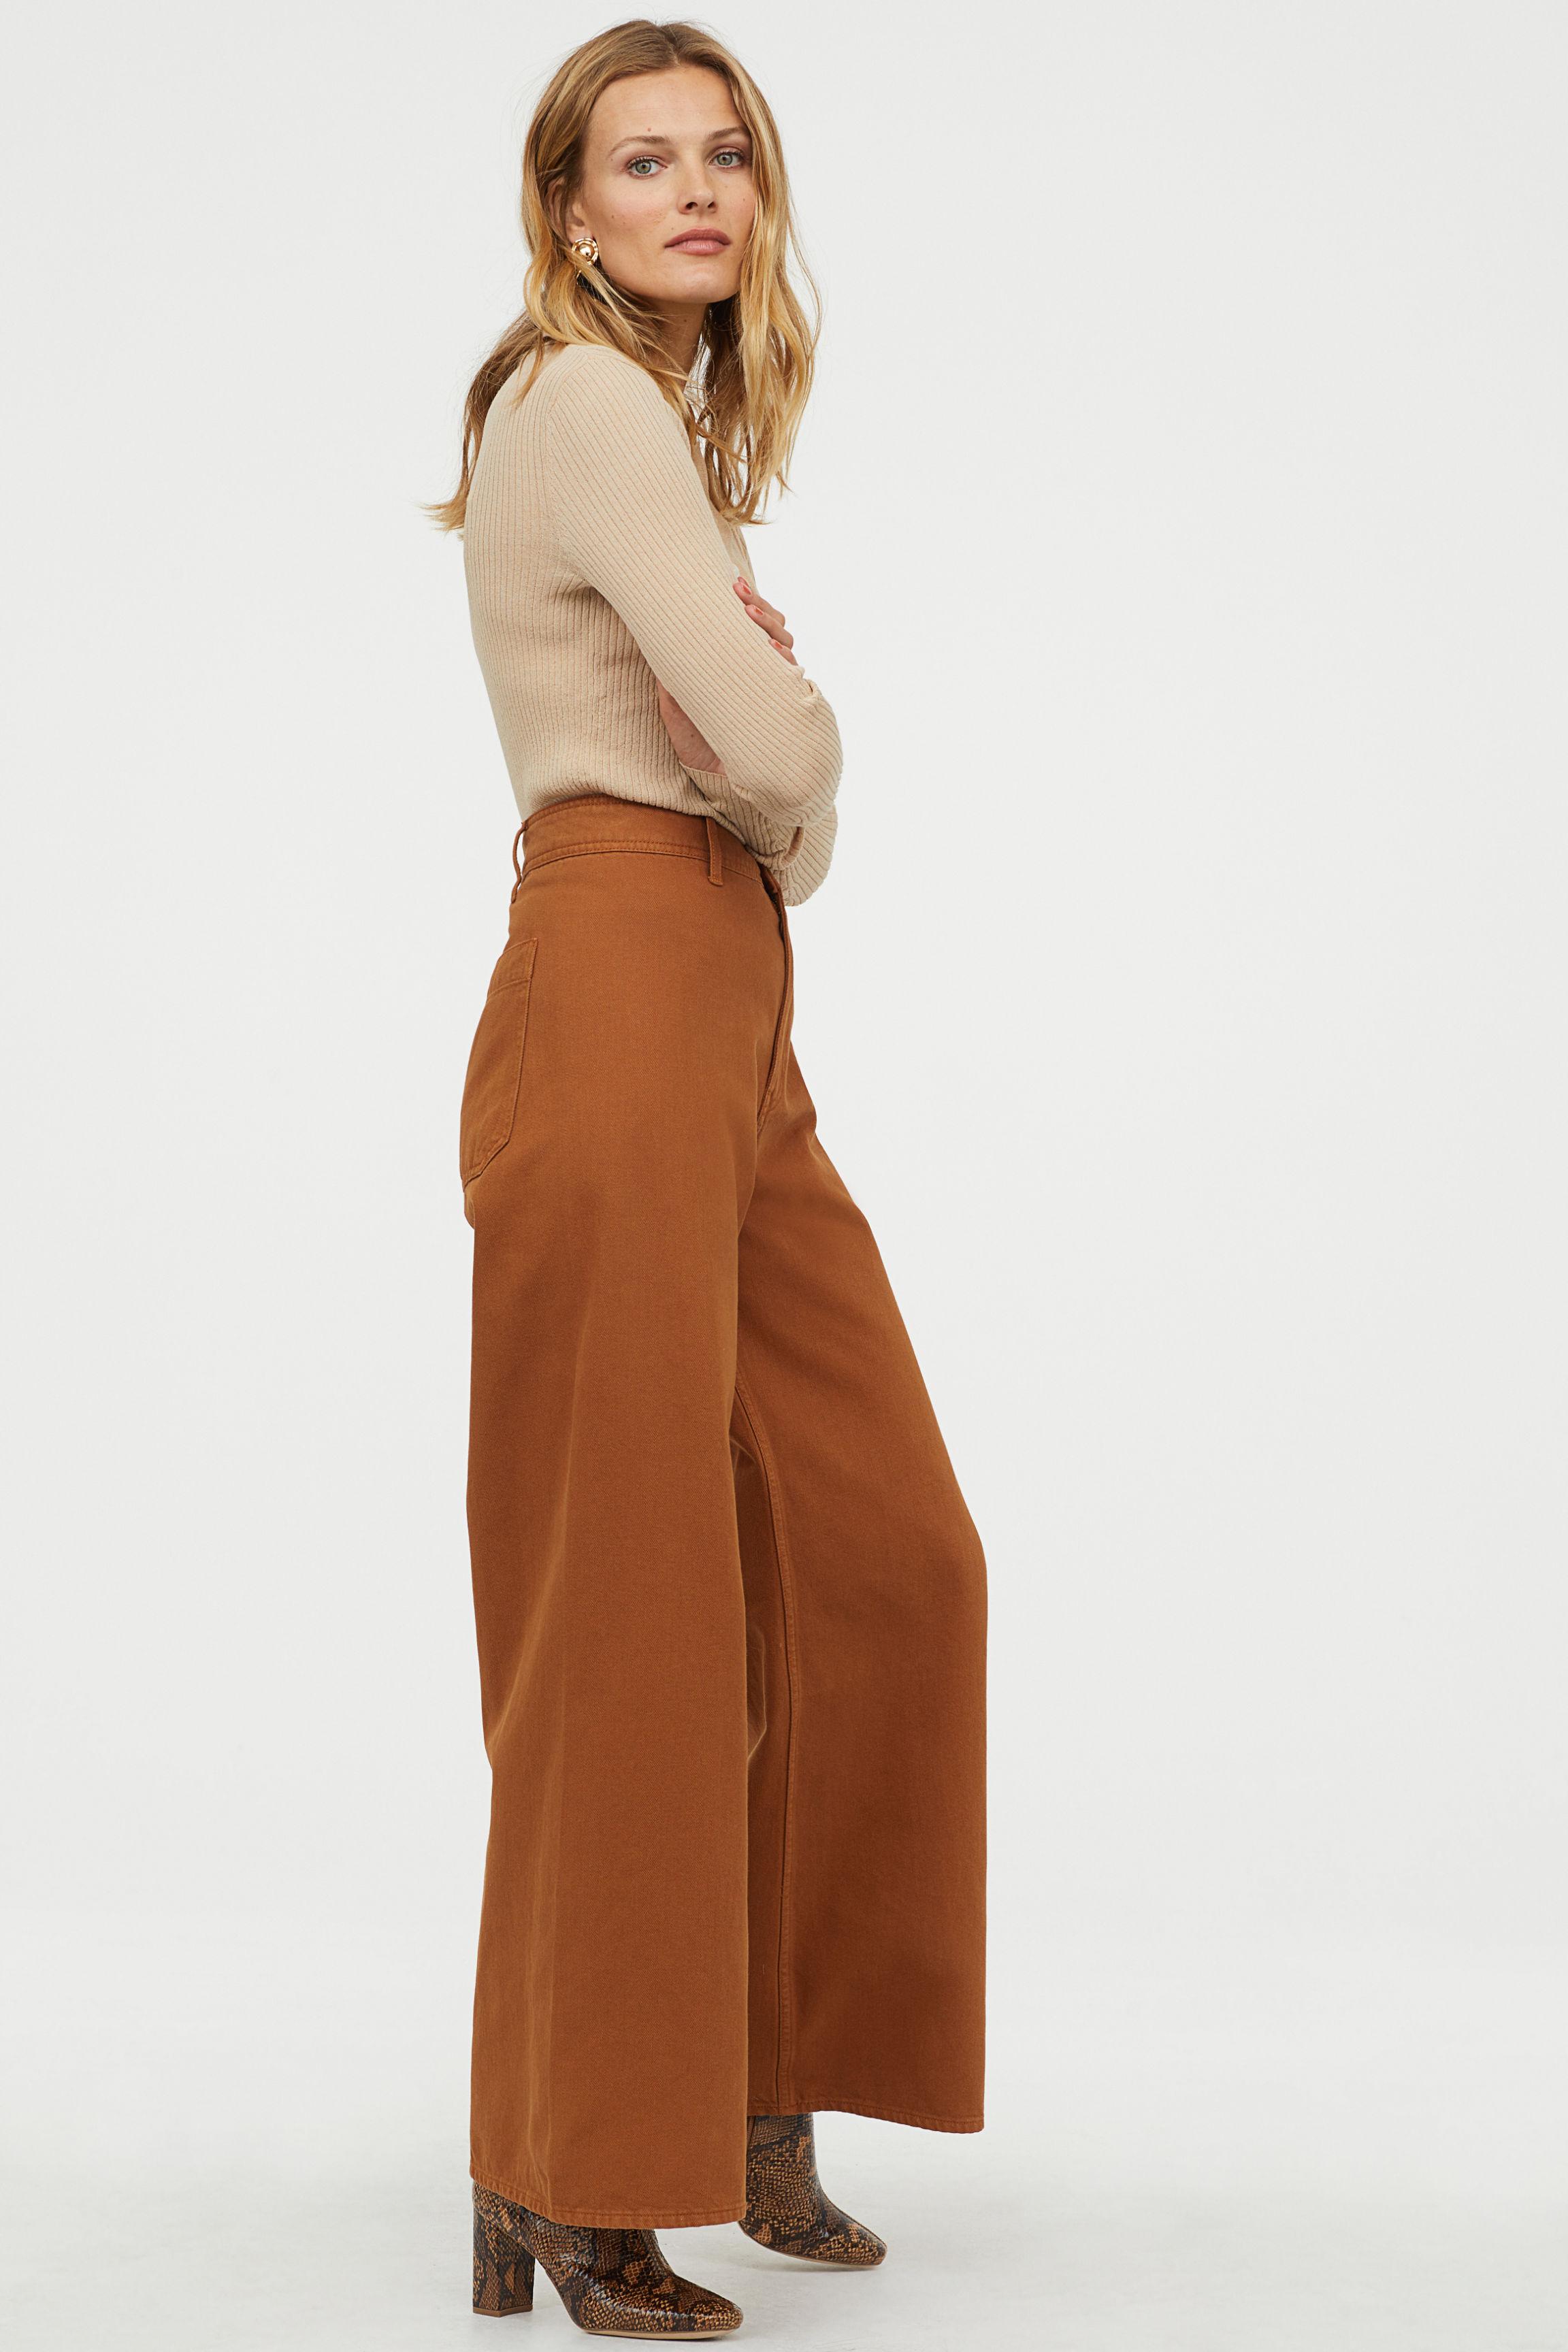 H&M Cotton Wide-leg Twill Pants in Rust Brown (Brown) | Lyst